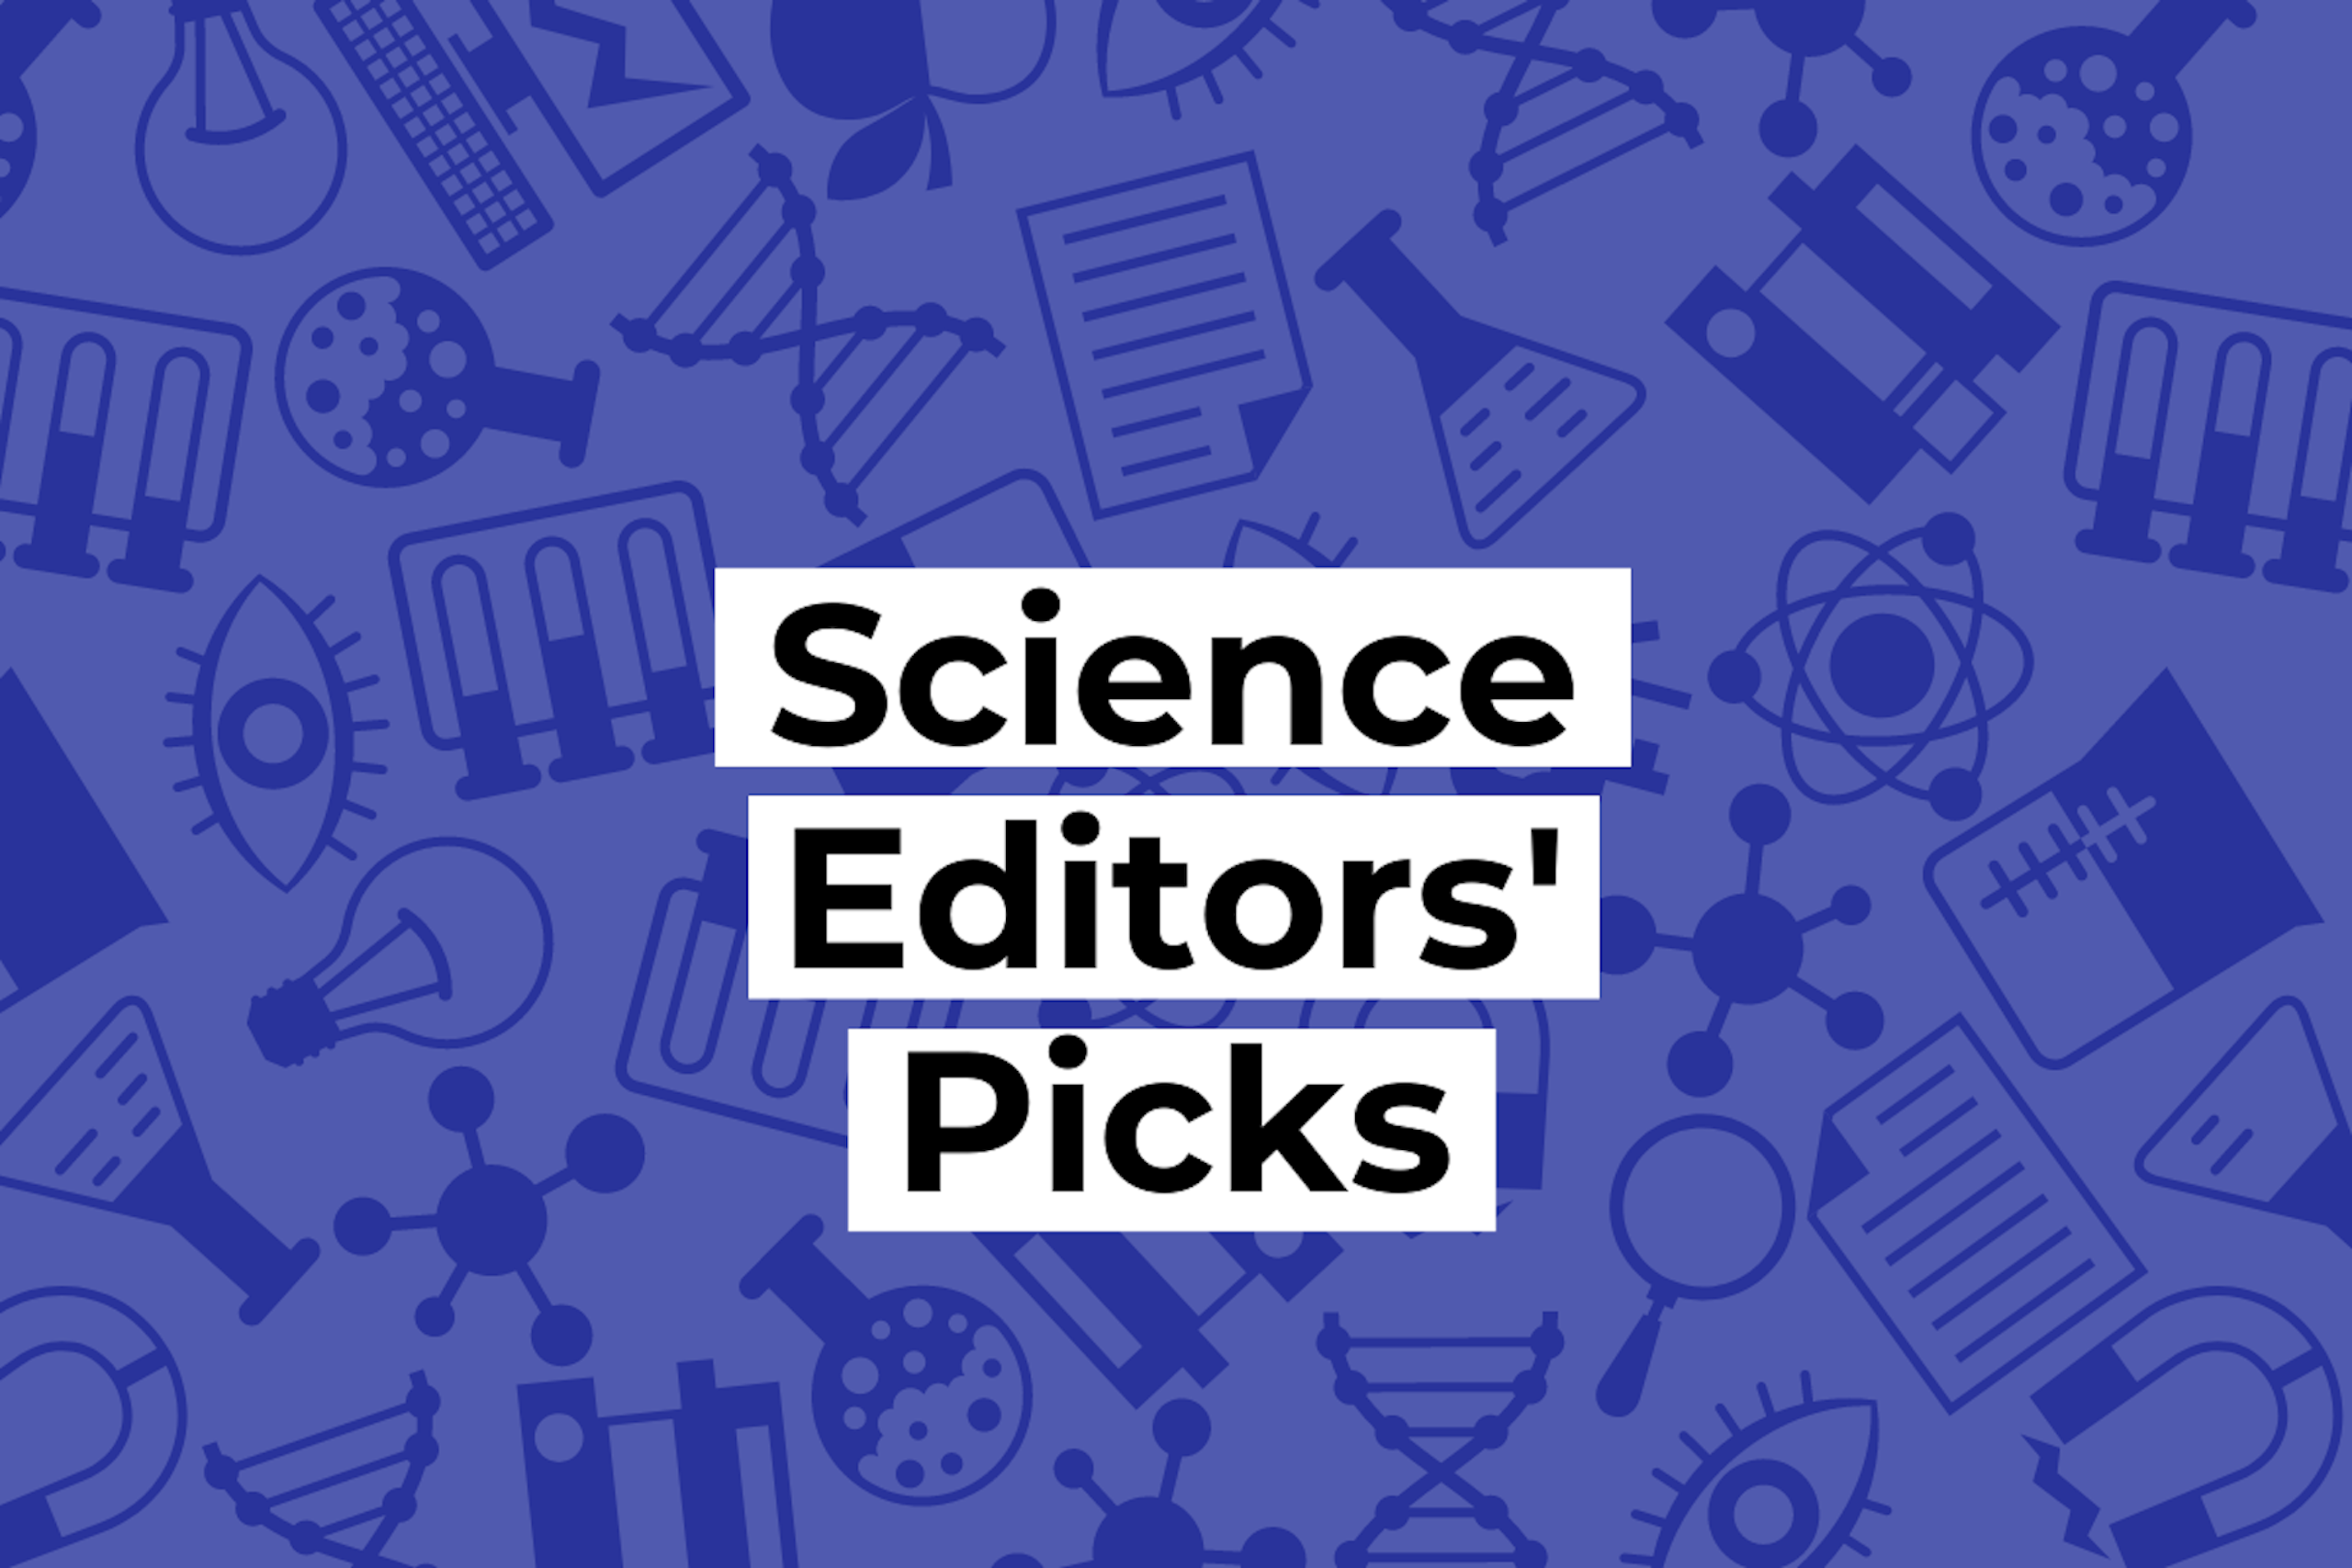 Graphic with science-related icons and the text 'Science Editors' Picks' in the center.